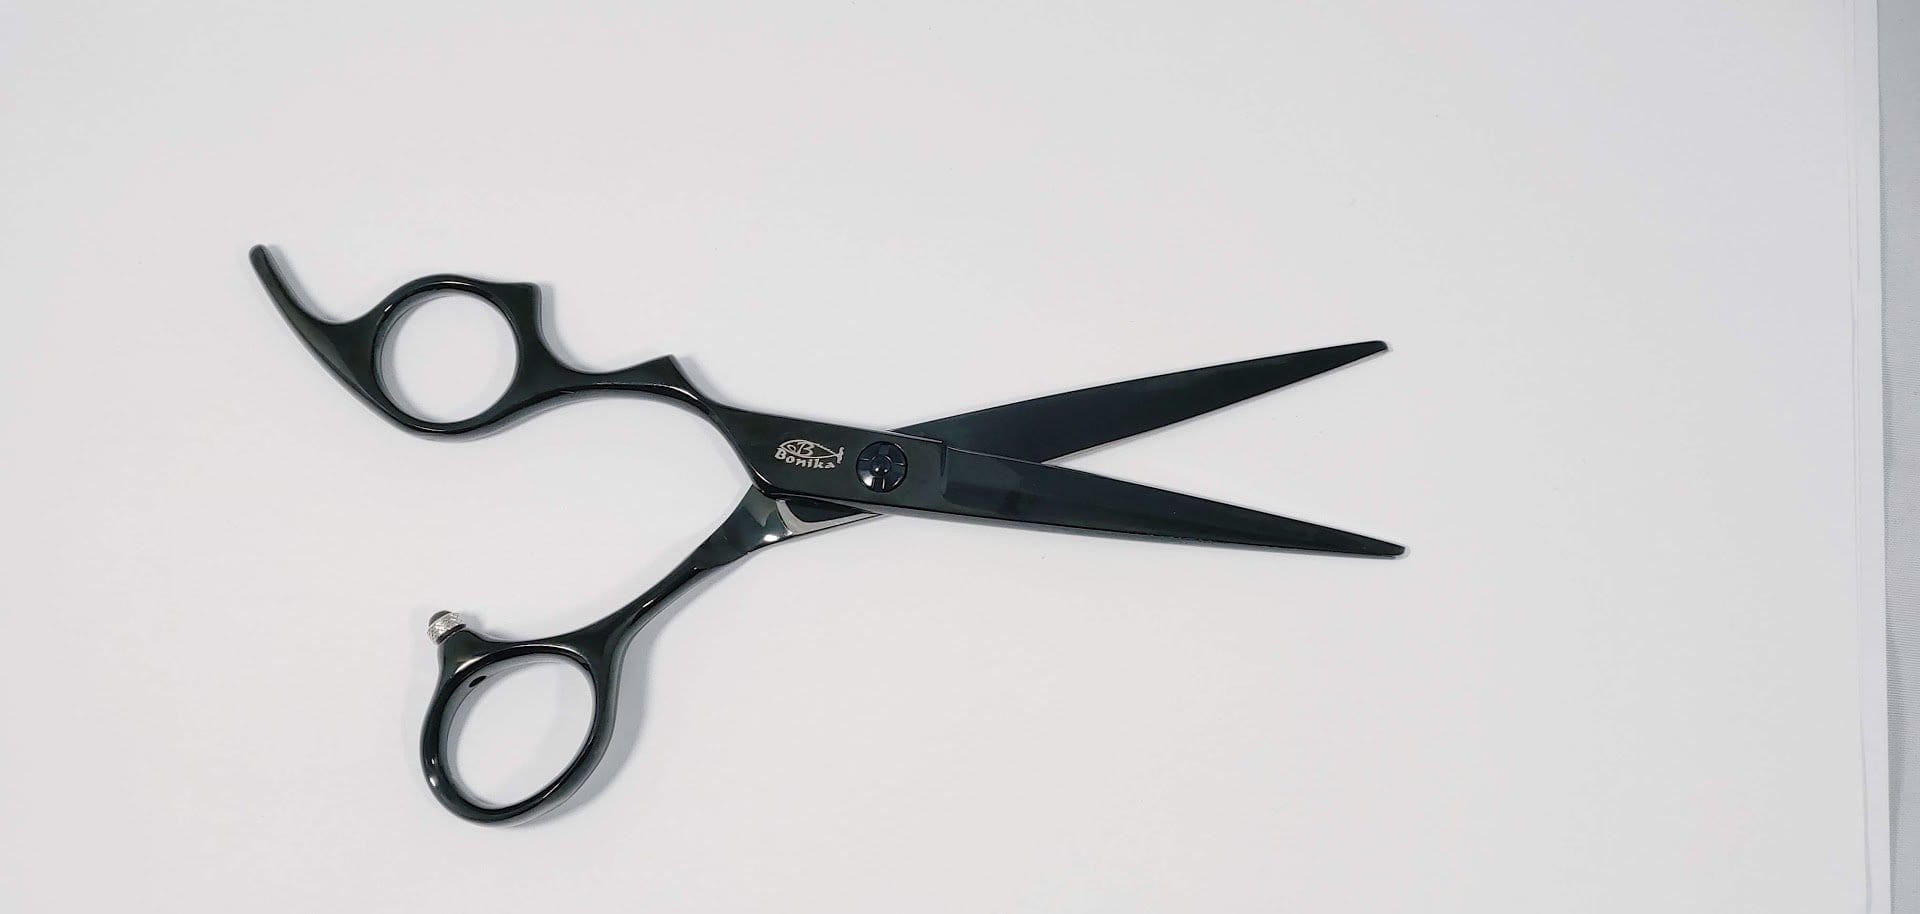 Left Handed High Leverage Shears/Scissors for Leather